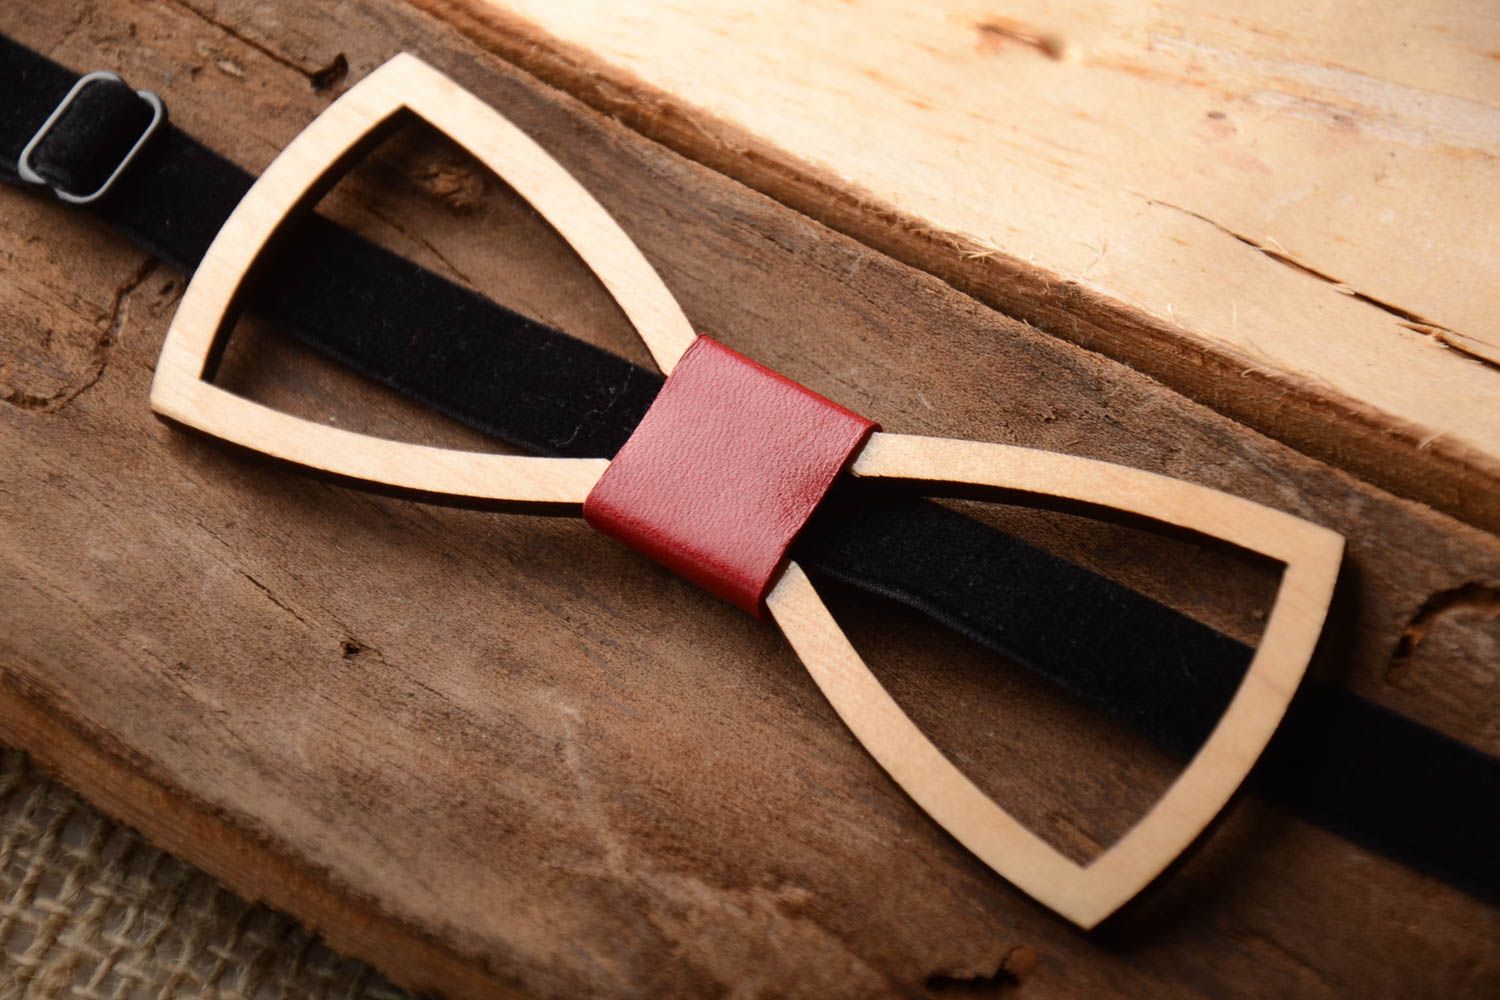 Handmade wooden bow tie stylish elegant bow tie cute accessory for men photo 1